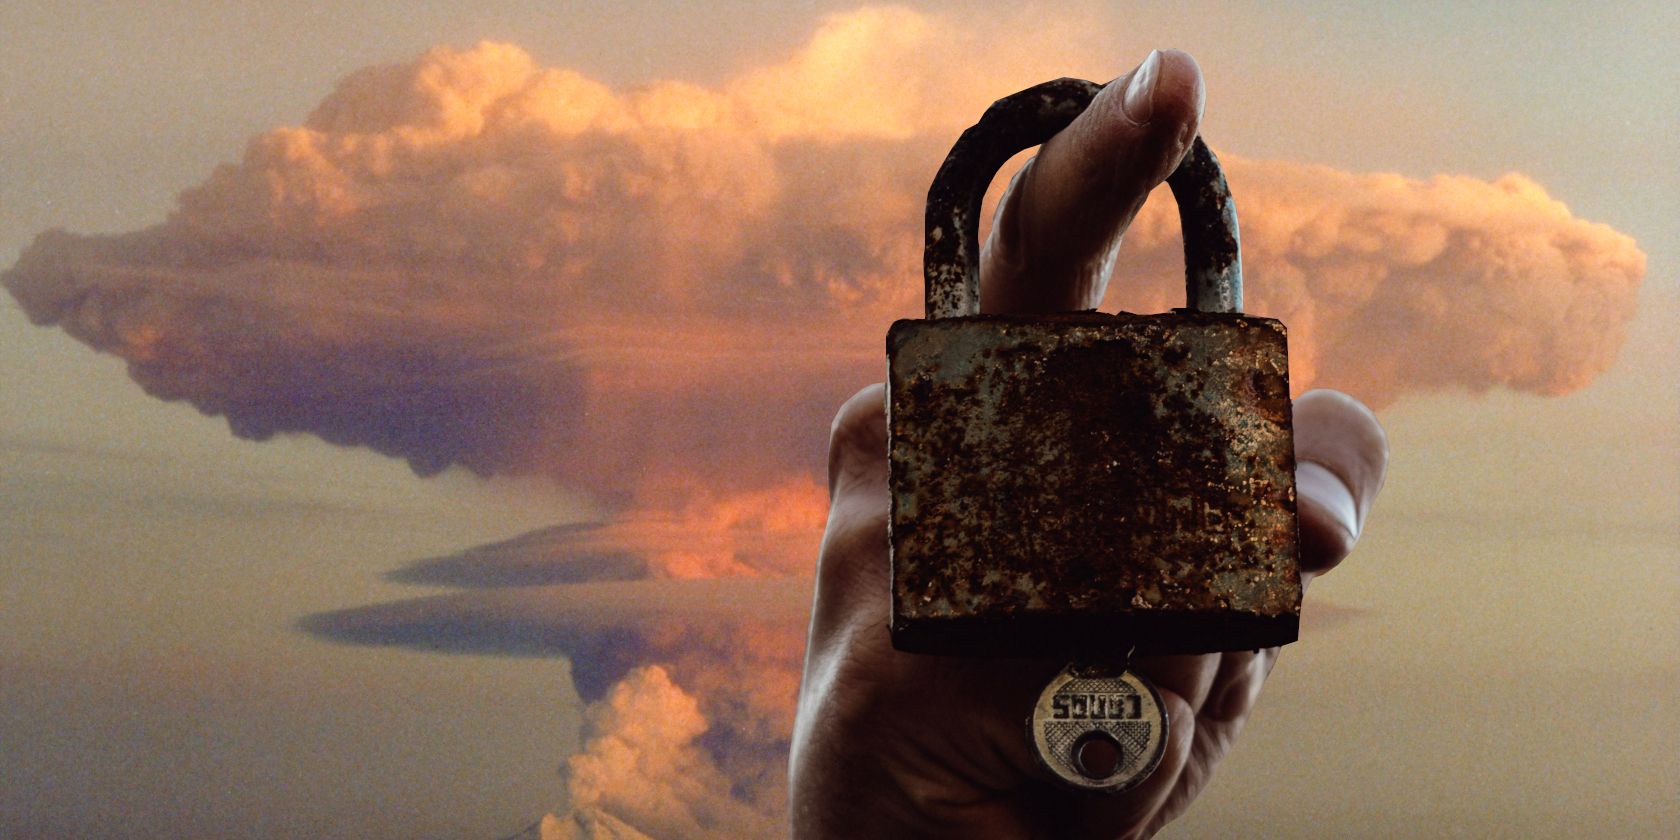 hand holding padlock on one finger in front of a mushroom cloud